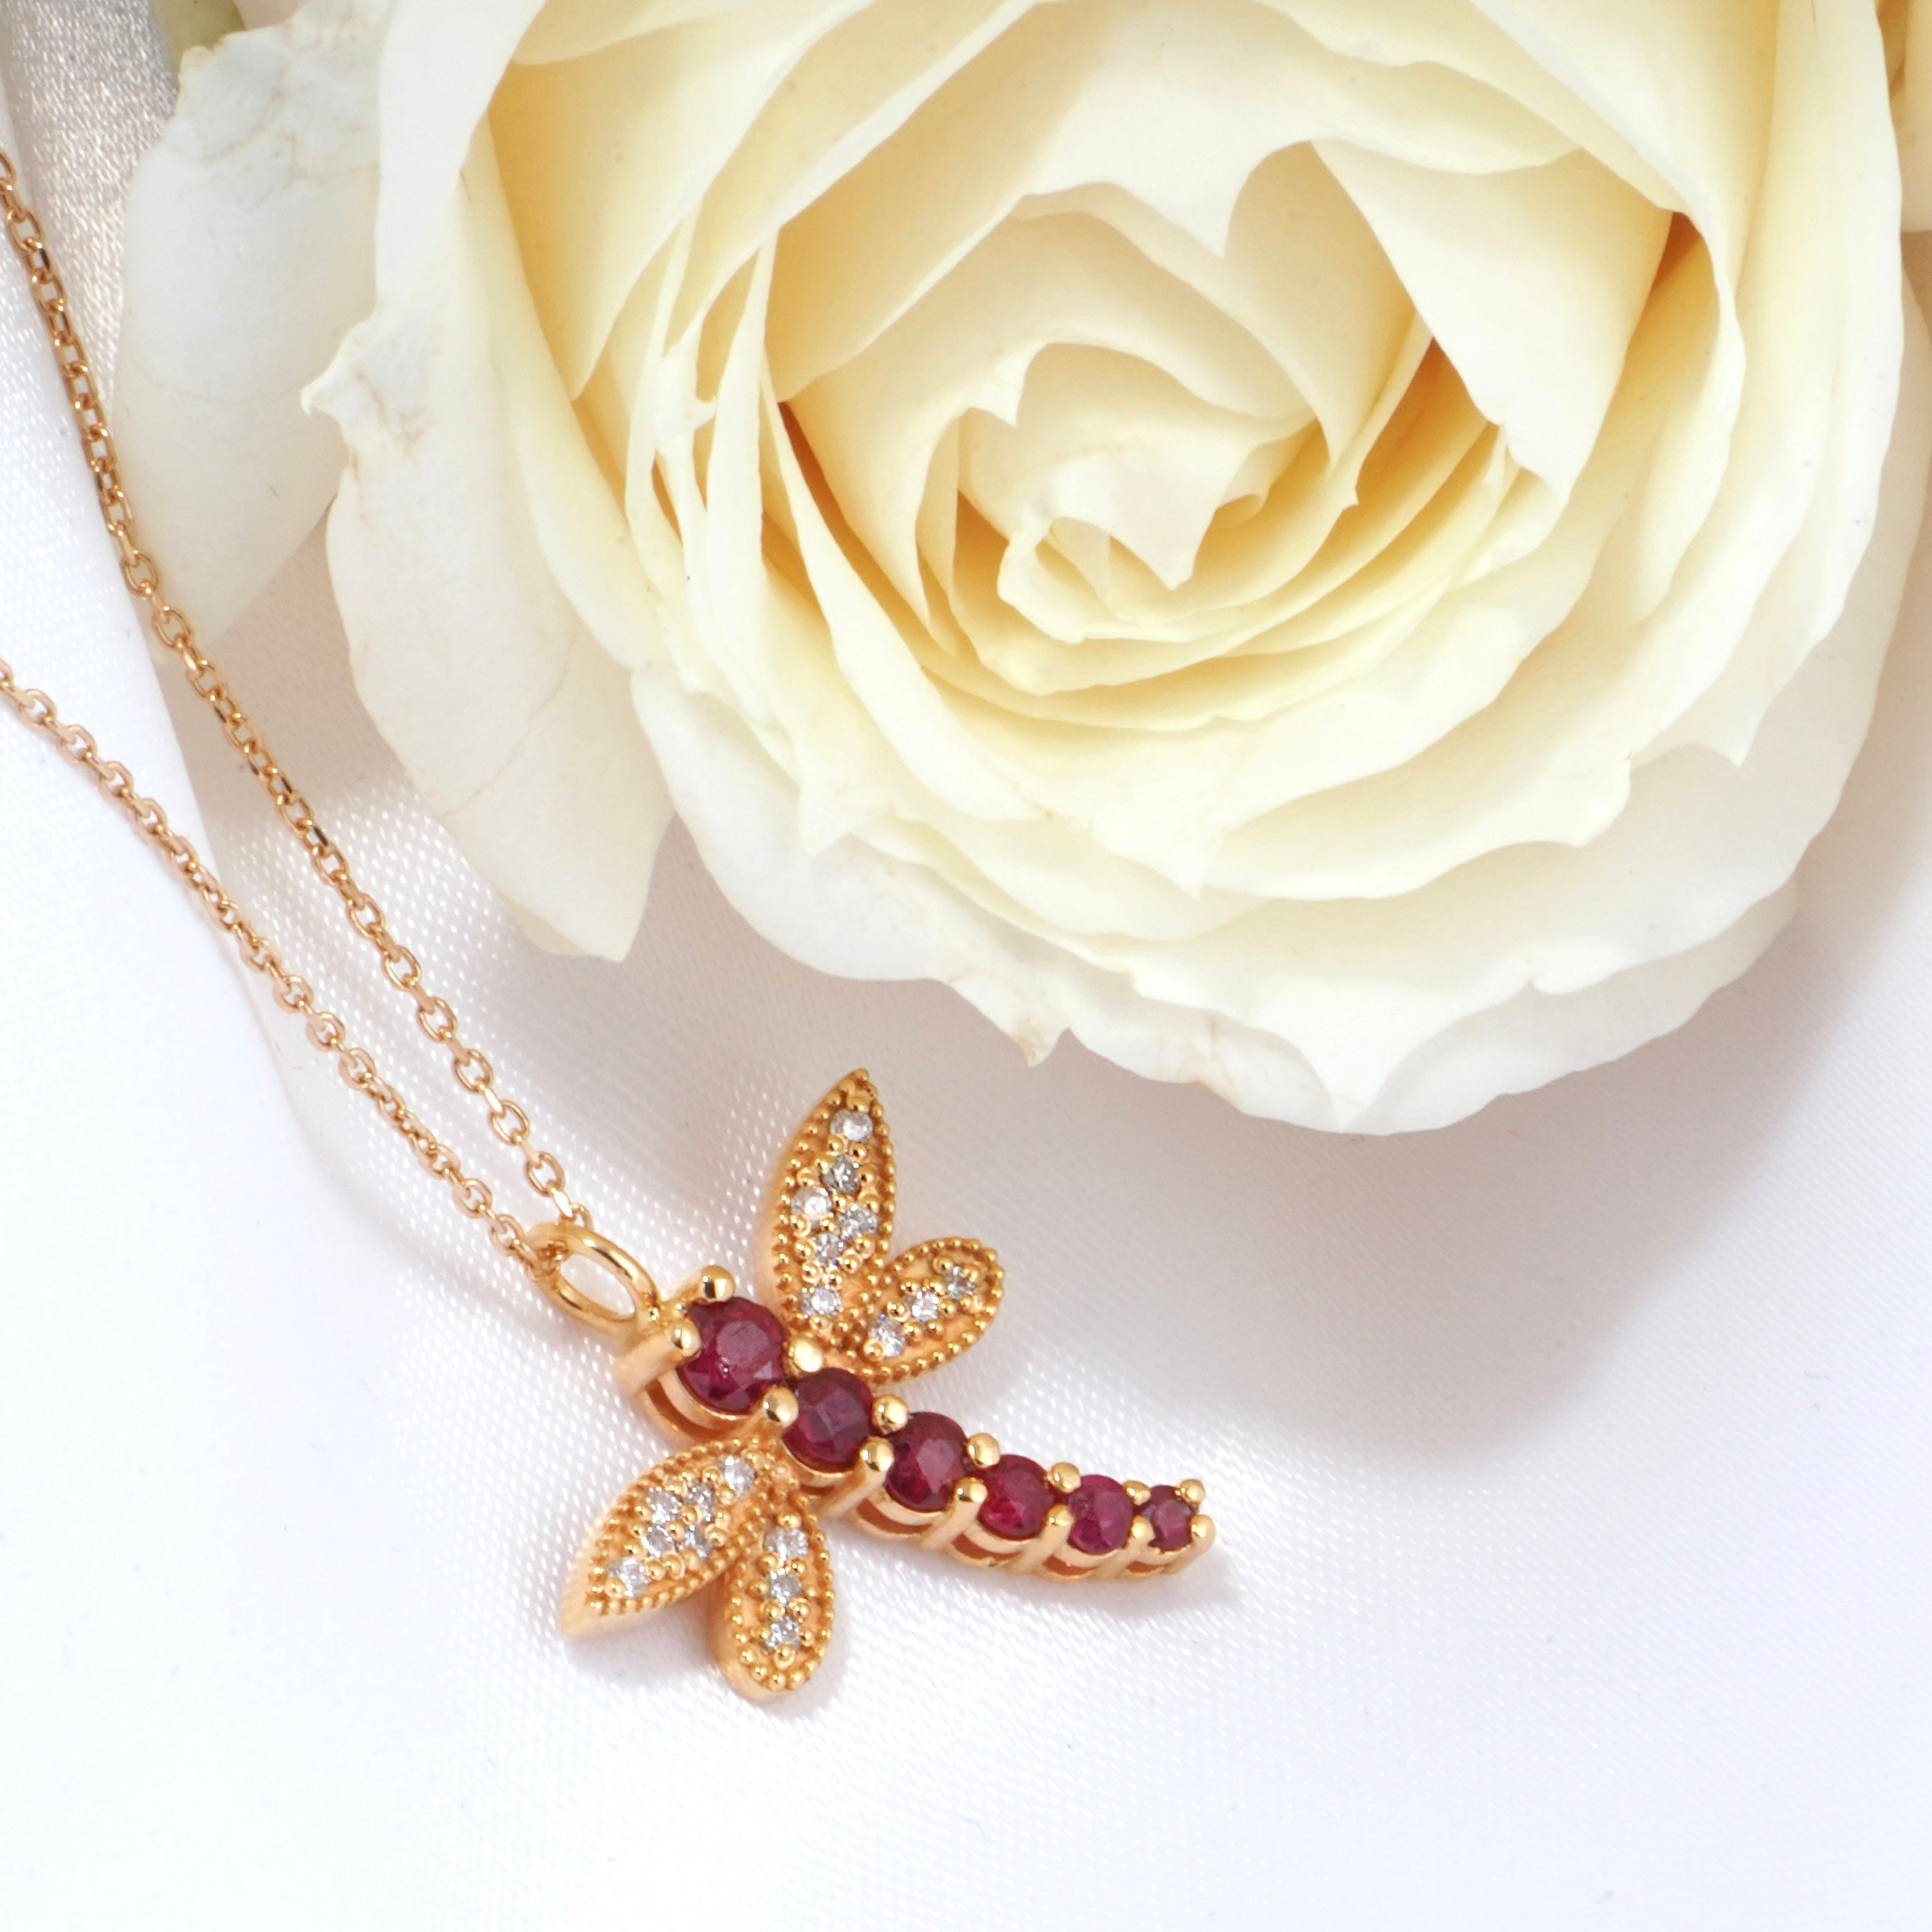 If you are looking for a unique and meaningful gift for yourself or someone special, you will love our 18k solid gold dragonfly pendant with chain!

This pendant is not just a beautiful accessory, but also a symbol of your personality and values. It